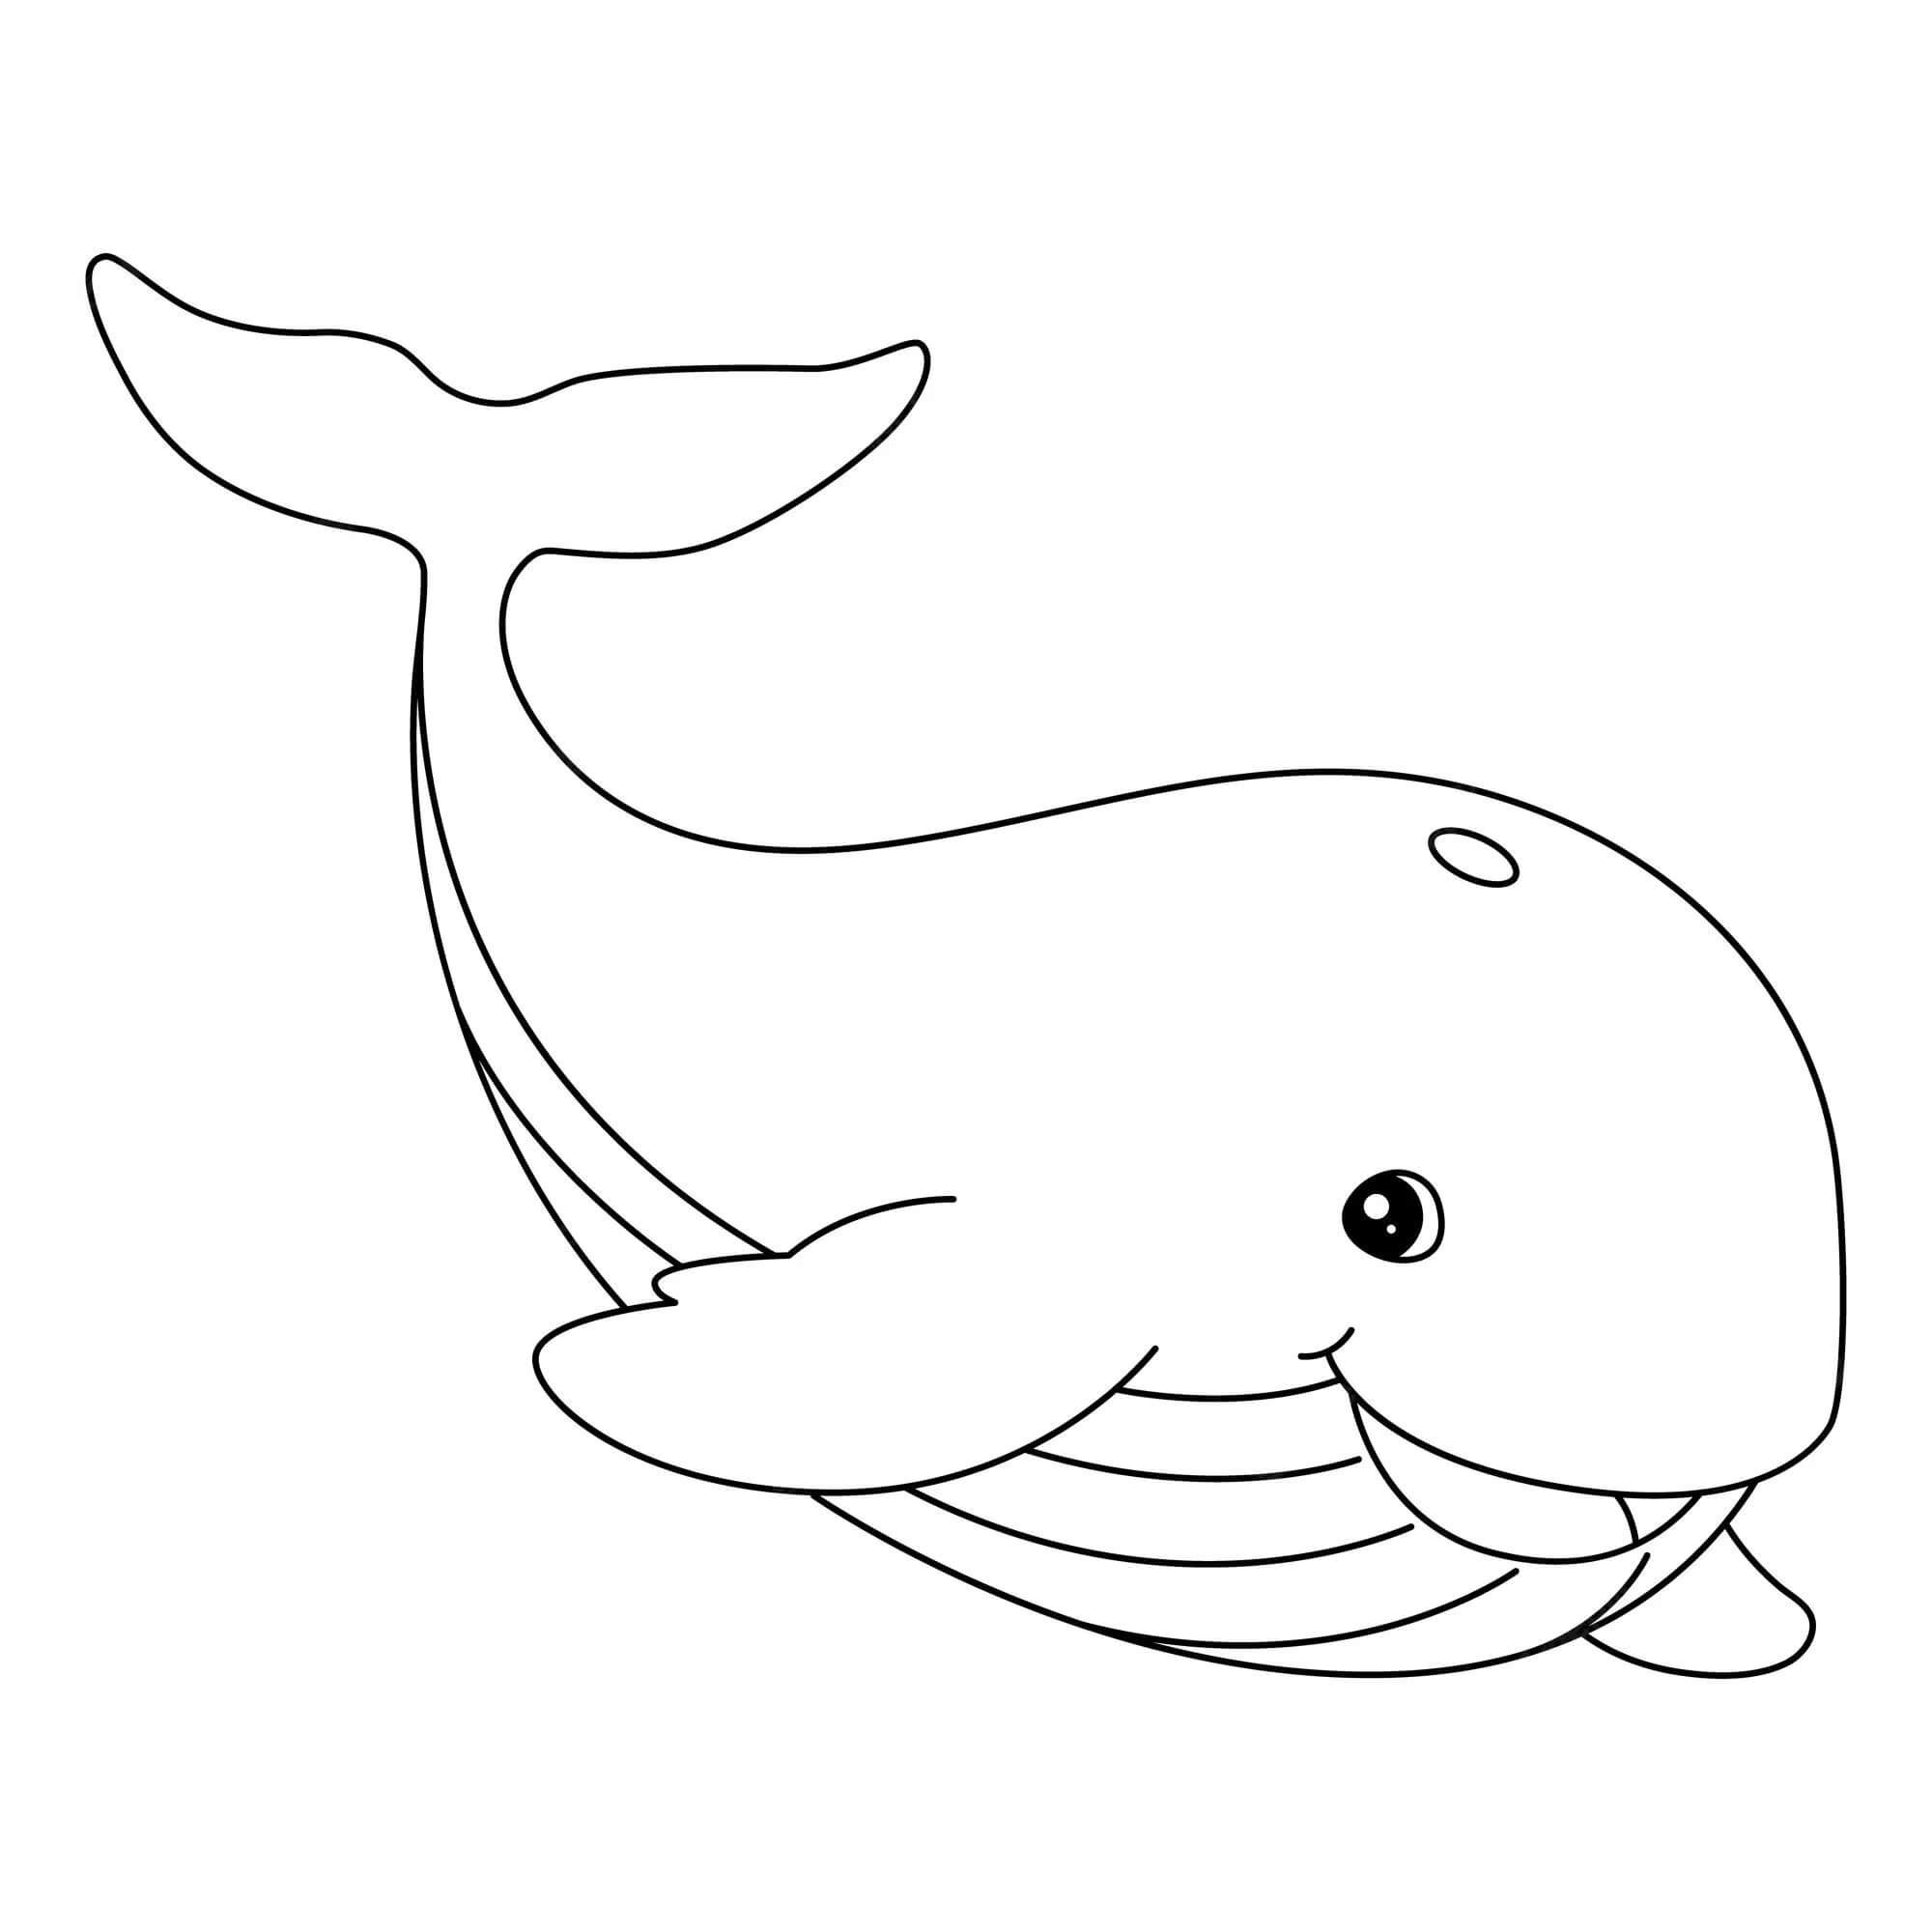 Two Whales coloring page - Download, Print or Color Online for Free